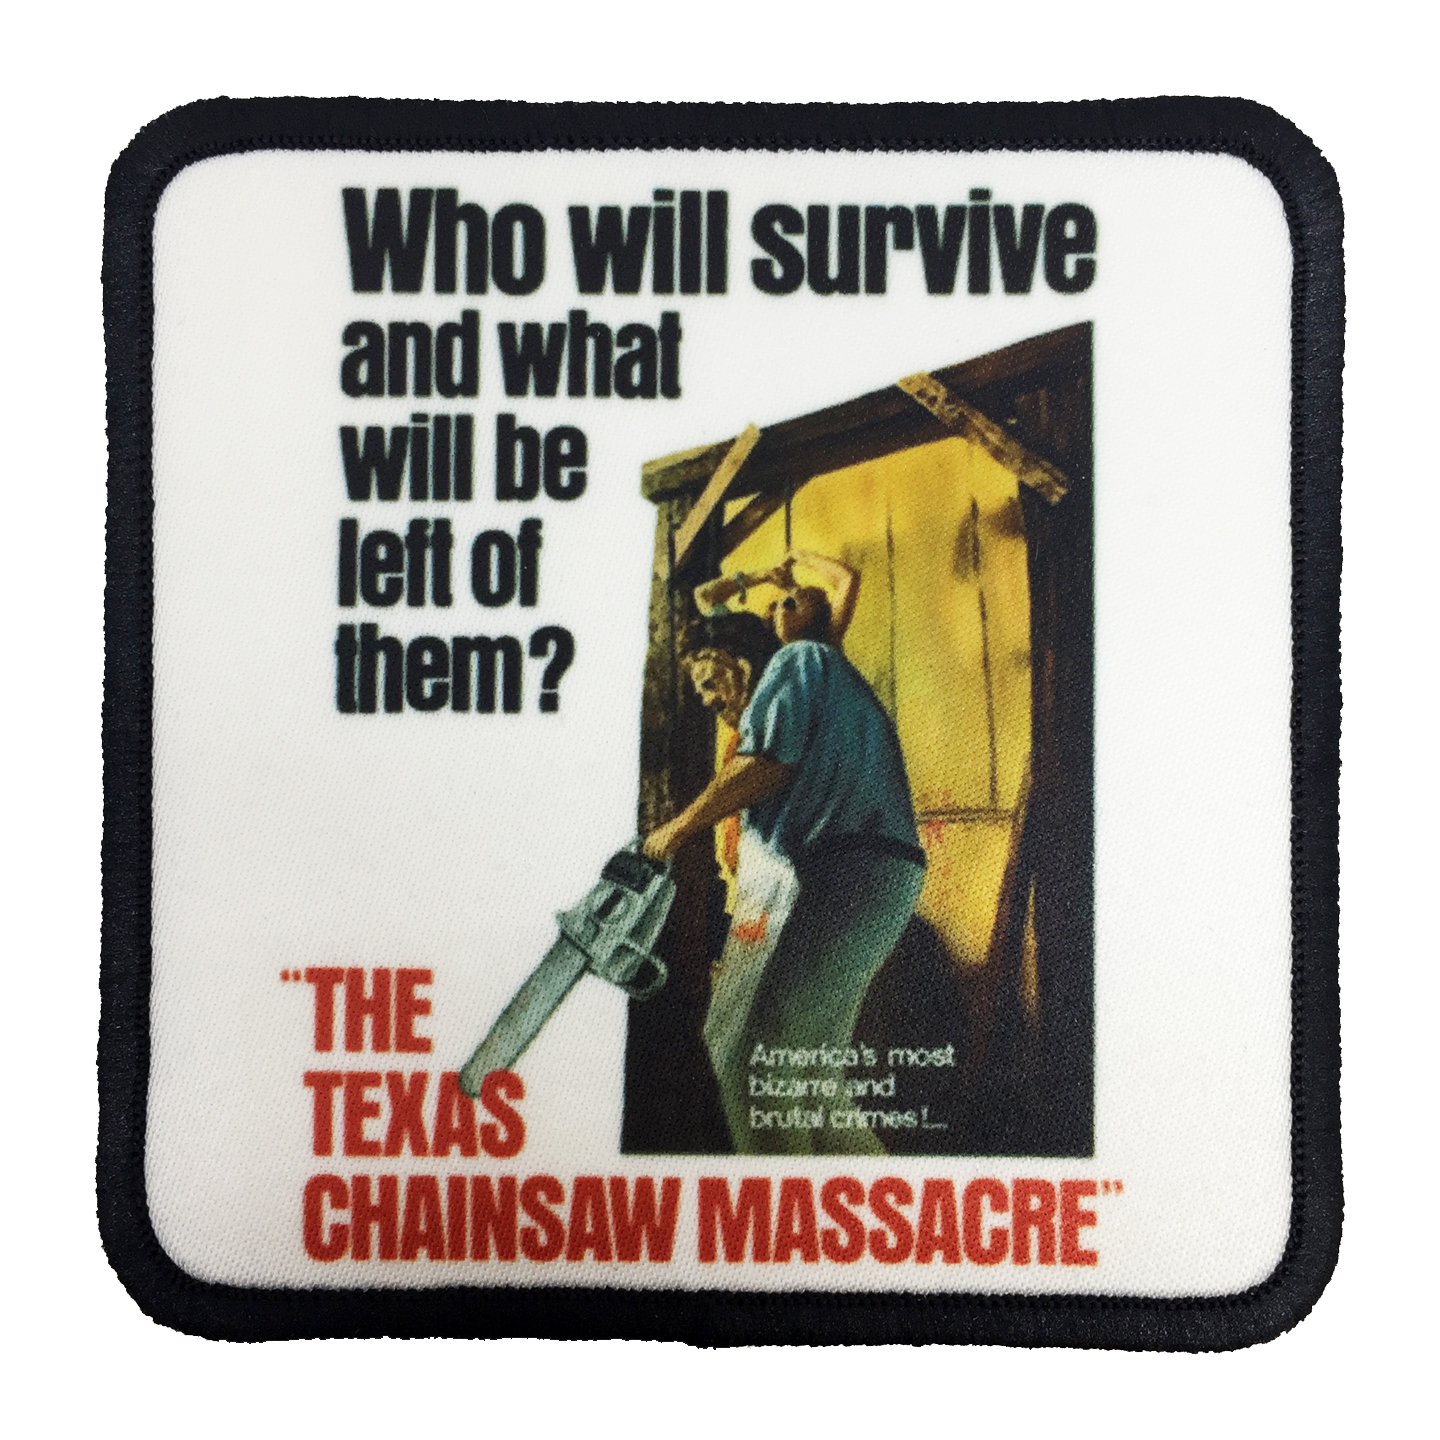 Texas Chainsaw Massacre Iron-On Patch - UNMASKED Horror & Punk Patches and Decor